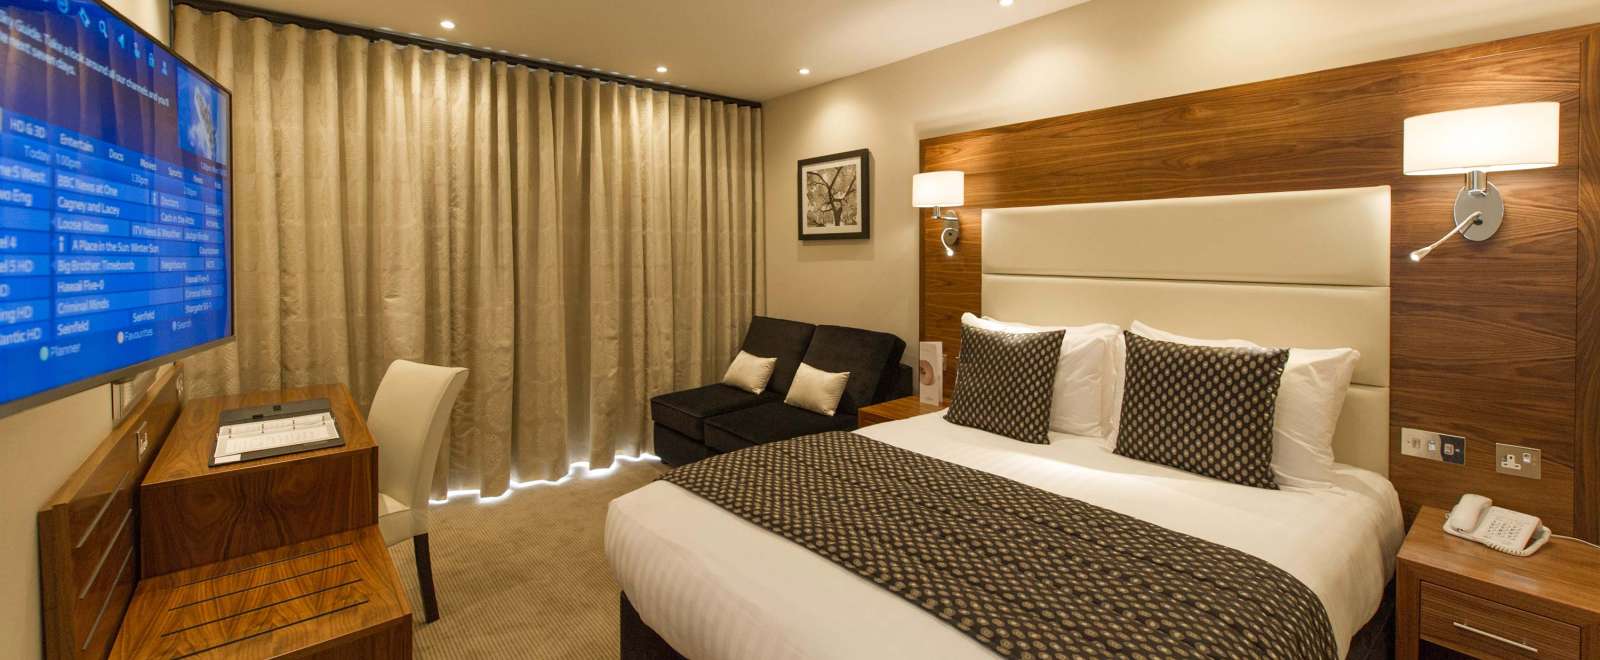 Devon Hotel Accommodation Bed with Seating Area and Closed Curtains